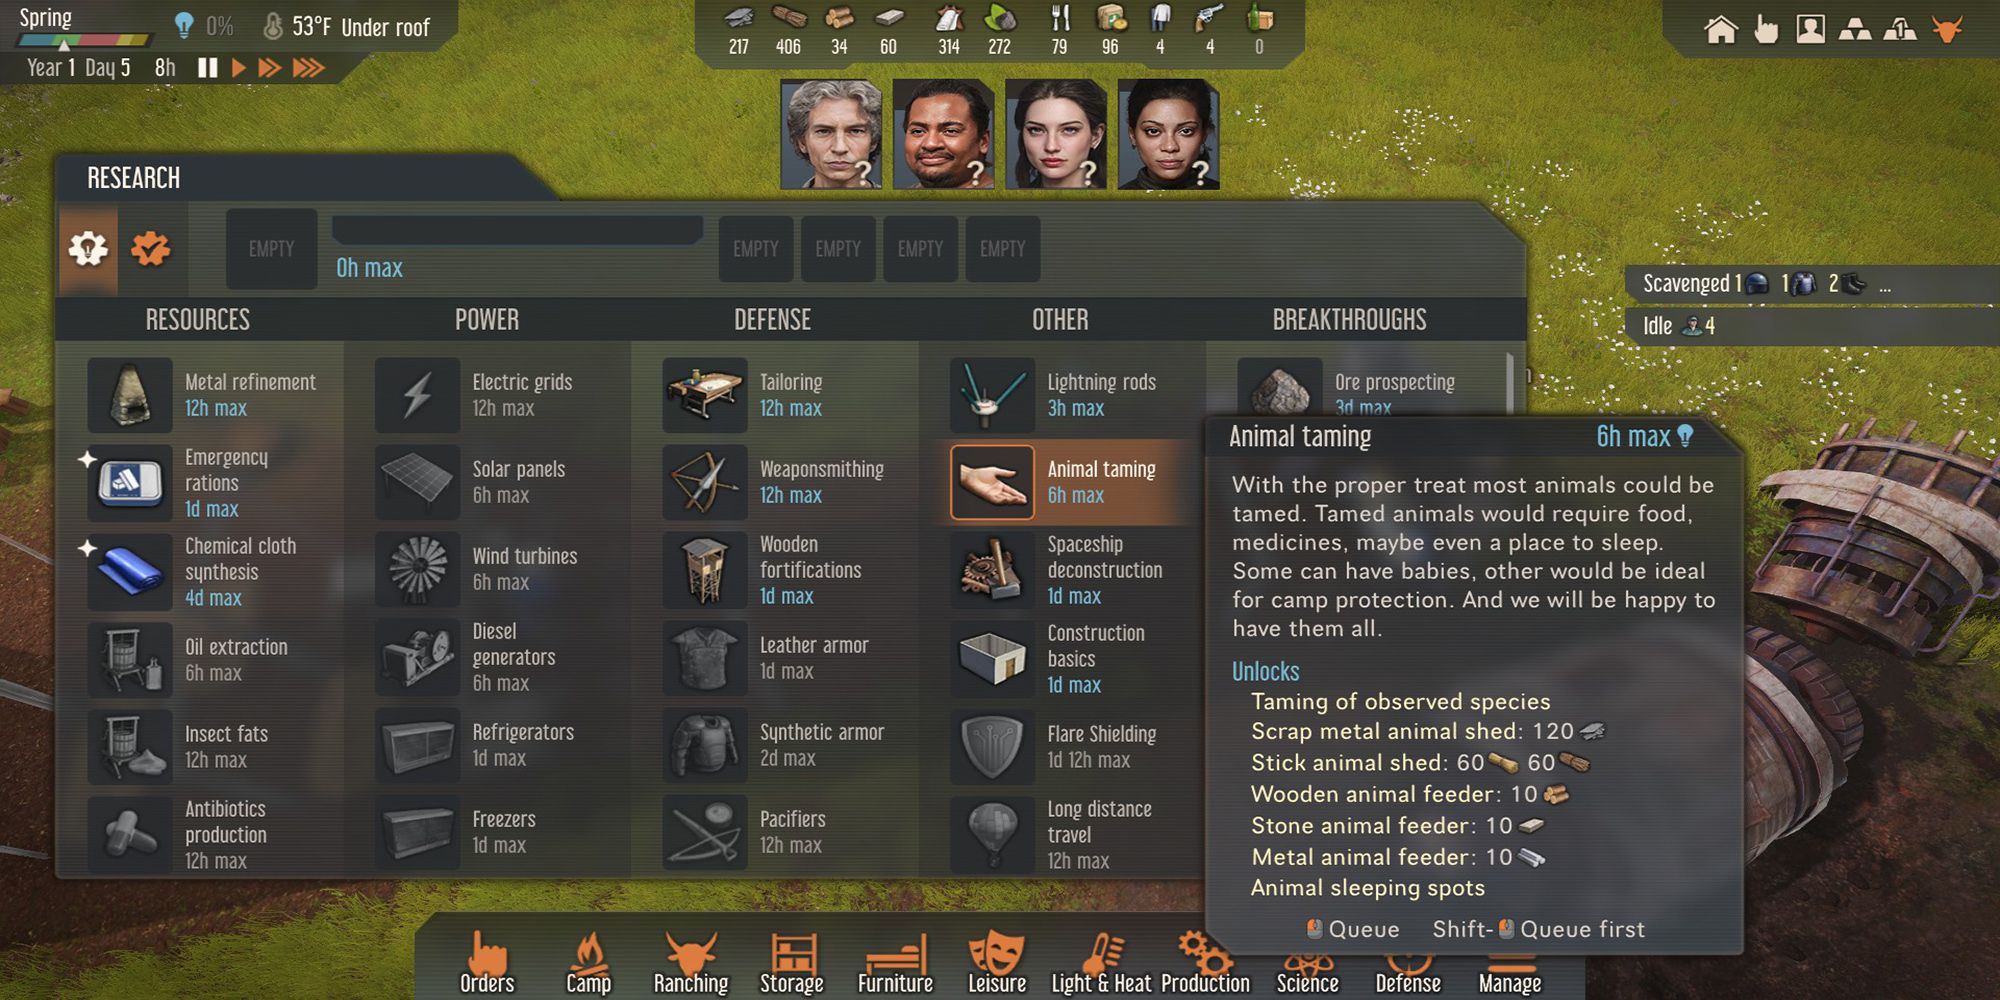 The Animal Taming research task, as viewed in Stranded: Alien Dawn's research menu.